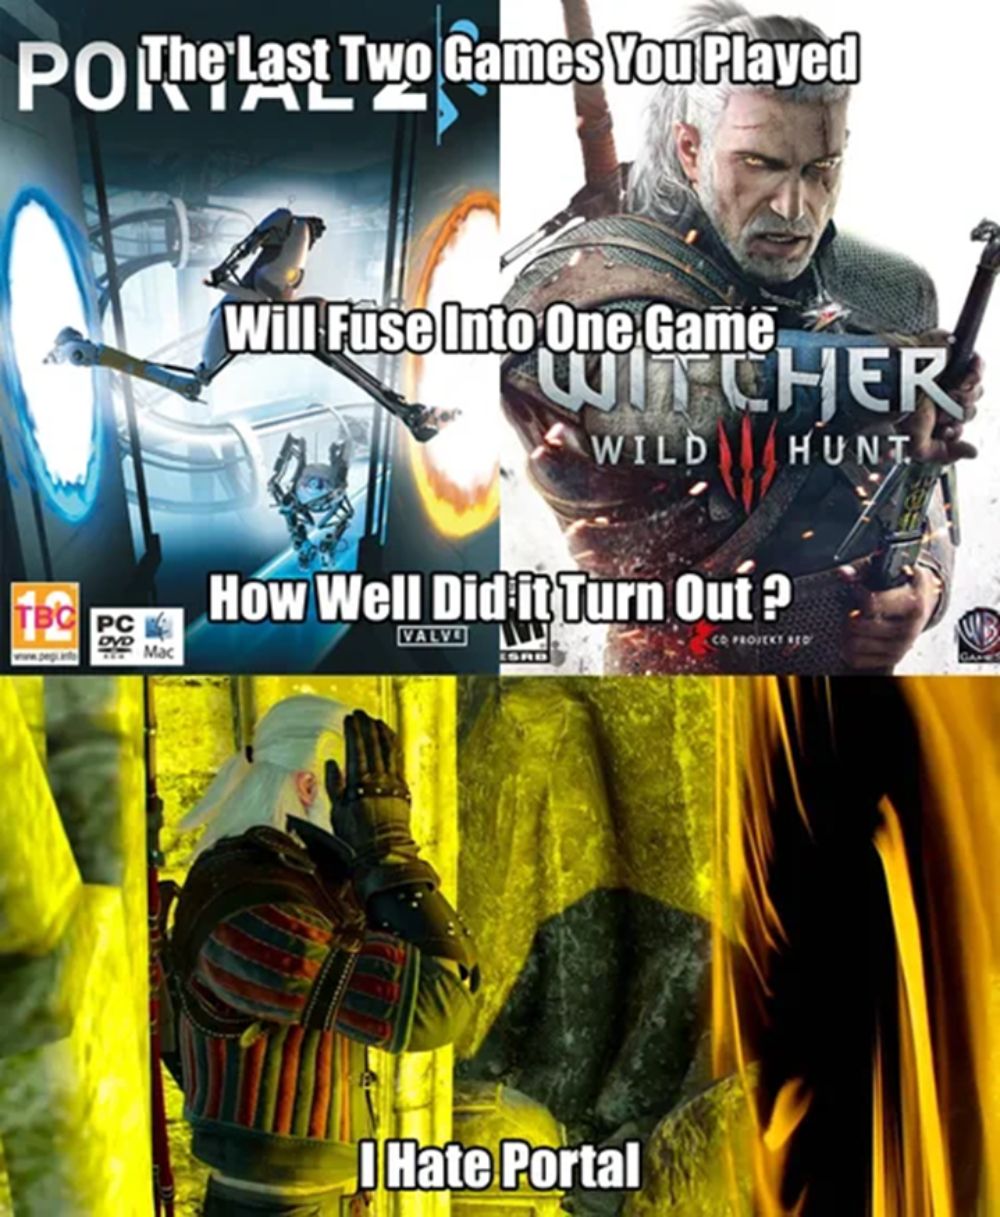 Meme about Witcher 3 Fused With Portal 2.